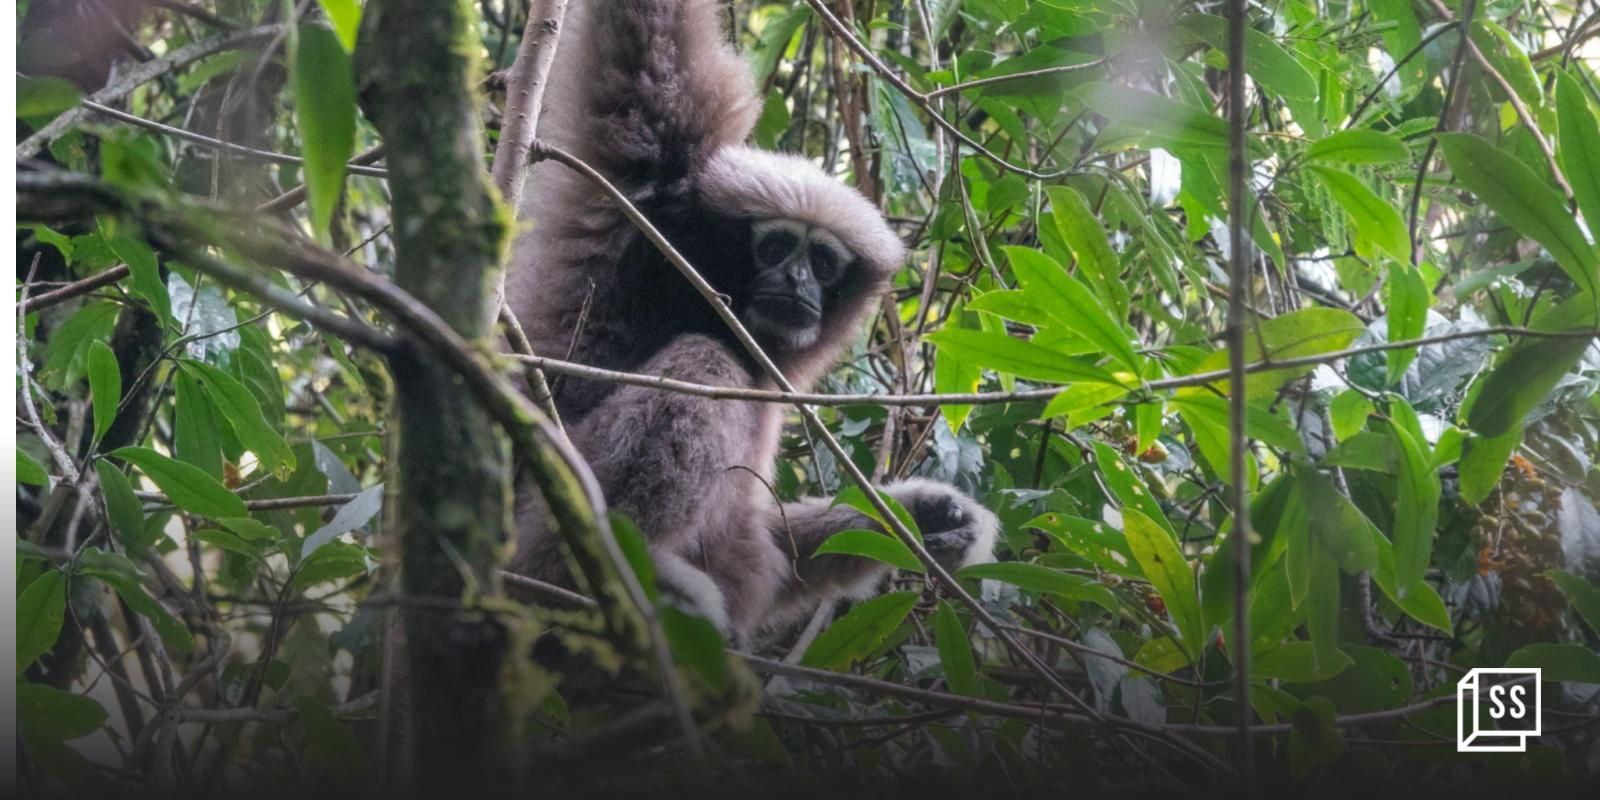 The last hope for degrading rainforests and vanishing gibbons of Northeast India